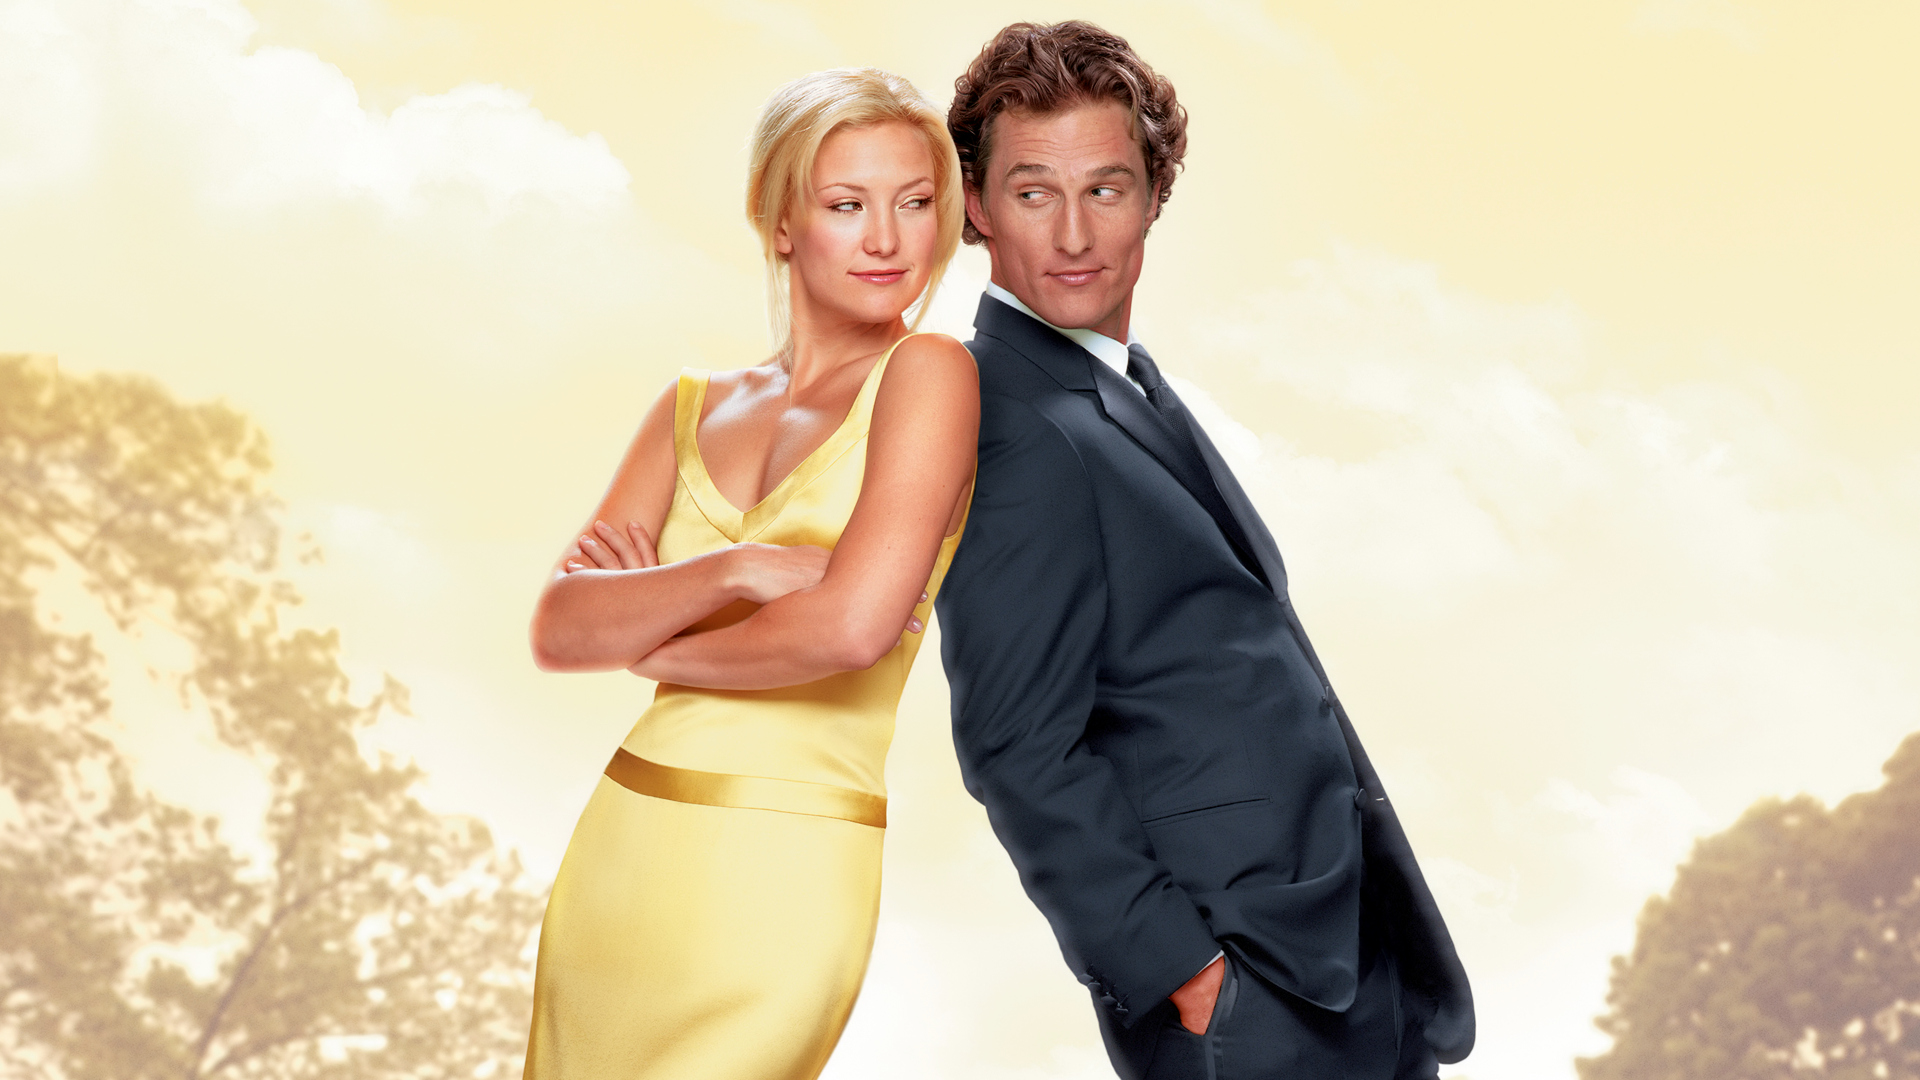 Promotional poster for the rom-com shows the two leads leaning back-to-back flirtatiously.